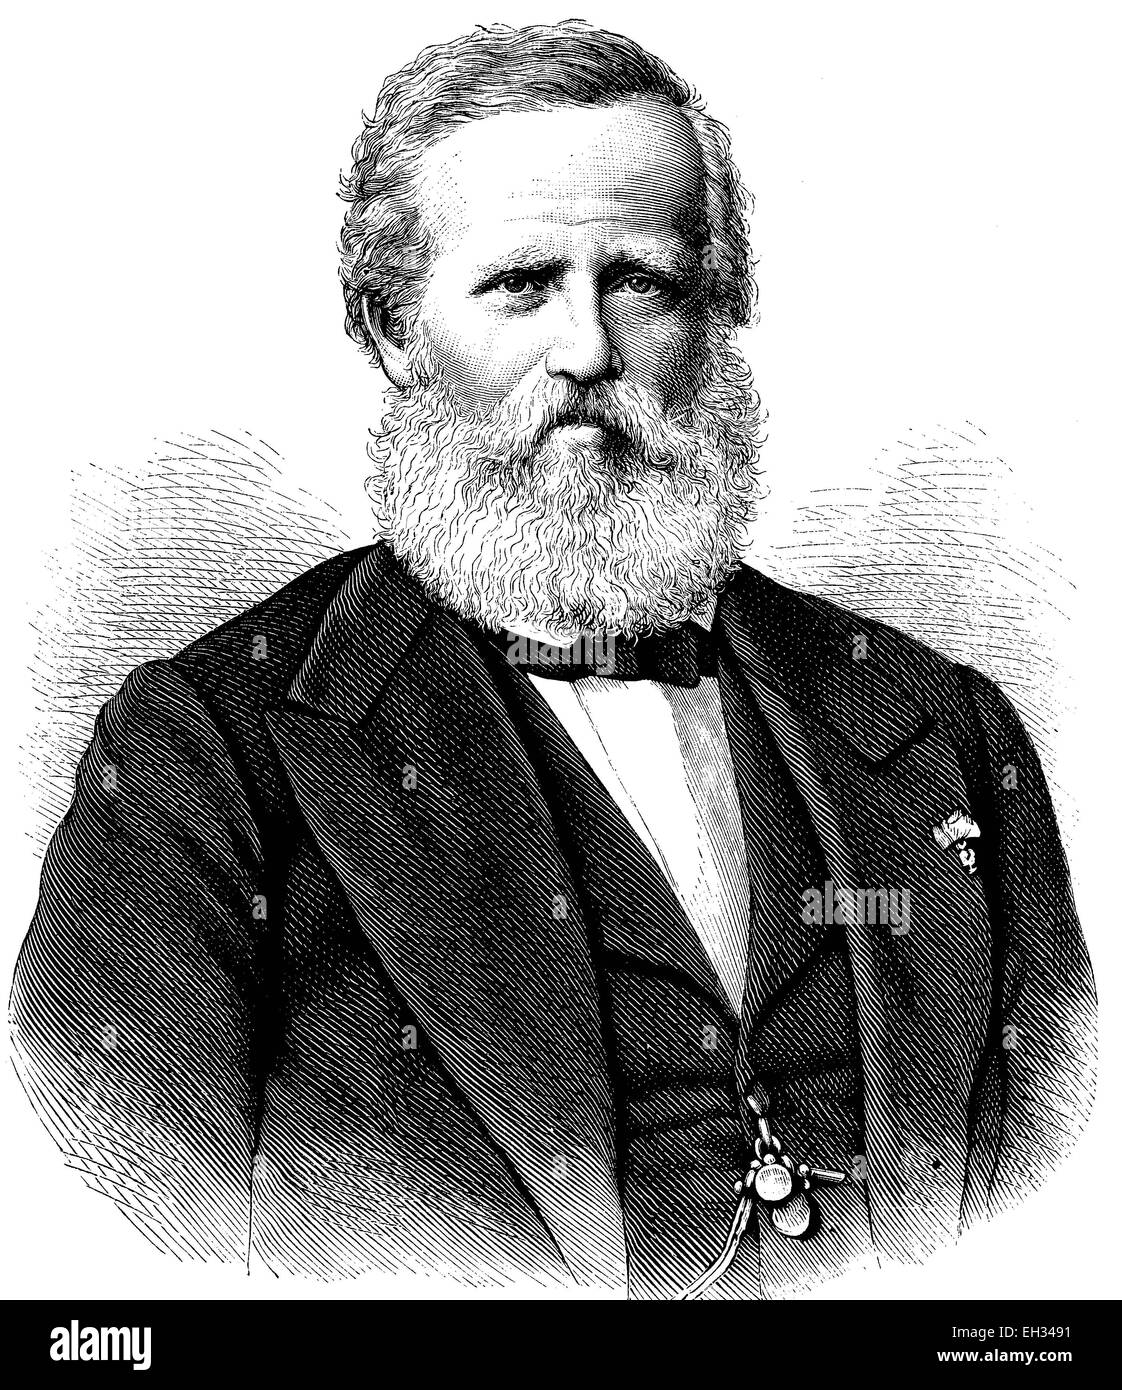 Dom Pedro II, 1825 - 1891, Emperor of Brazil from 1831 to 1889, woodcut 1888 Stock Photo